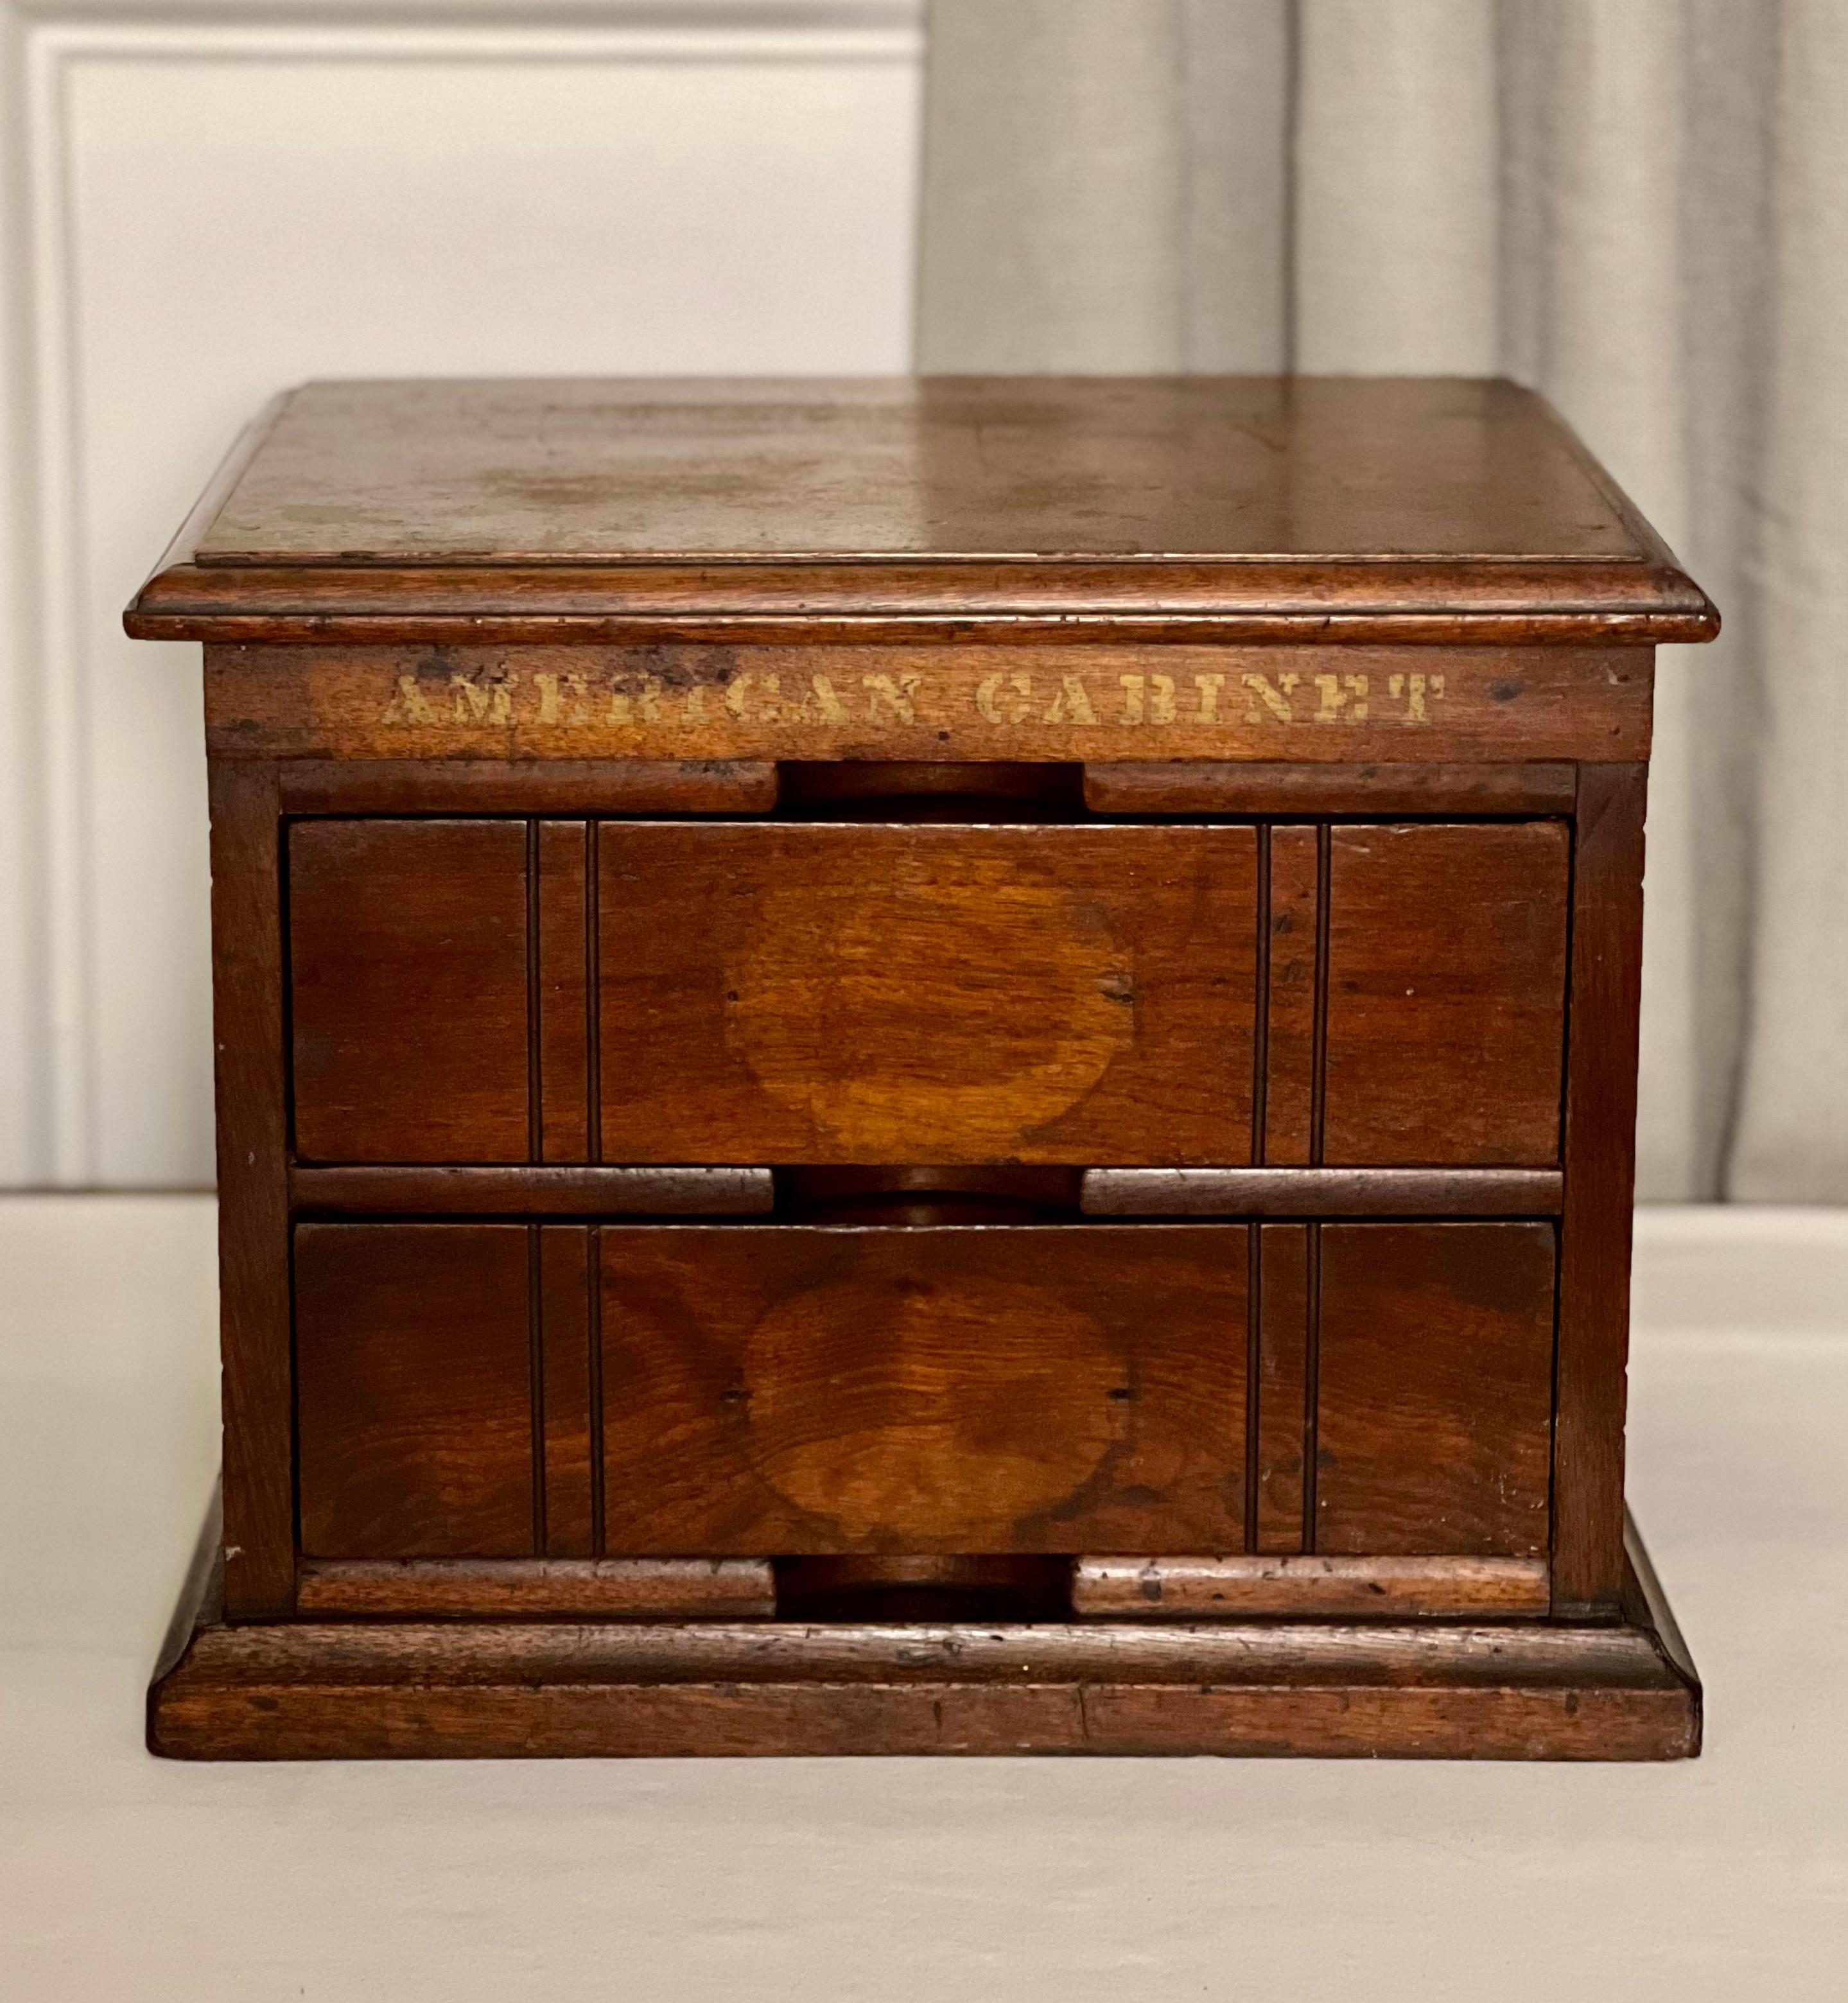 Antique Arts and Crafts letter-size oak desktop file cabinet by American Cabinet Company, c. 1900s.

Great little cabinet with two drawers ideal for a desk or tabletop. The drawers feature an open back, inset carved handles and are fitted with a